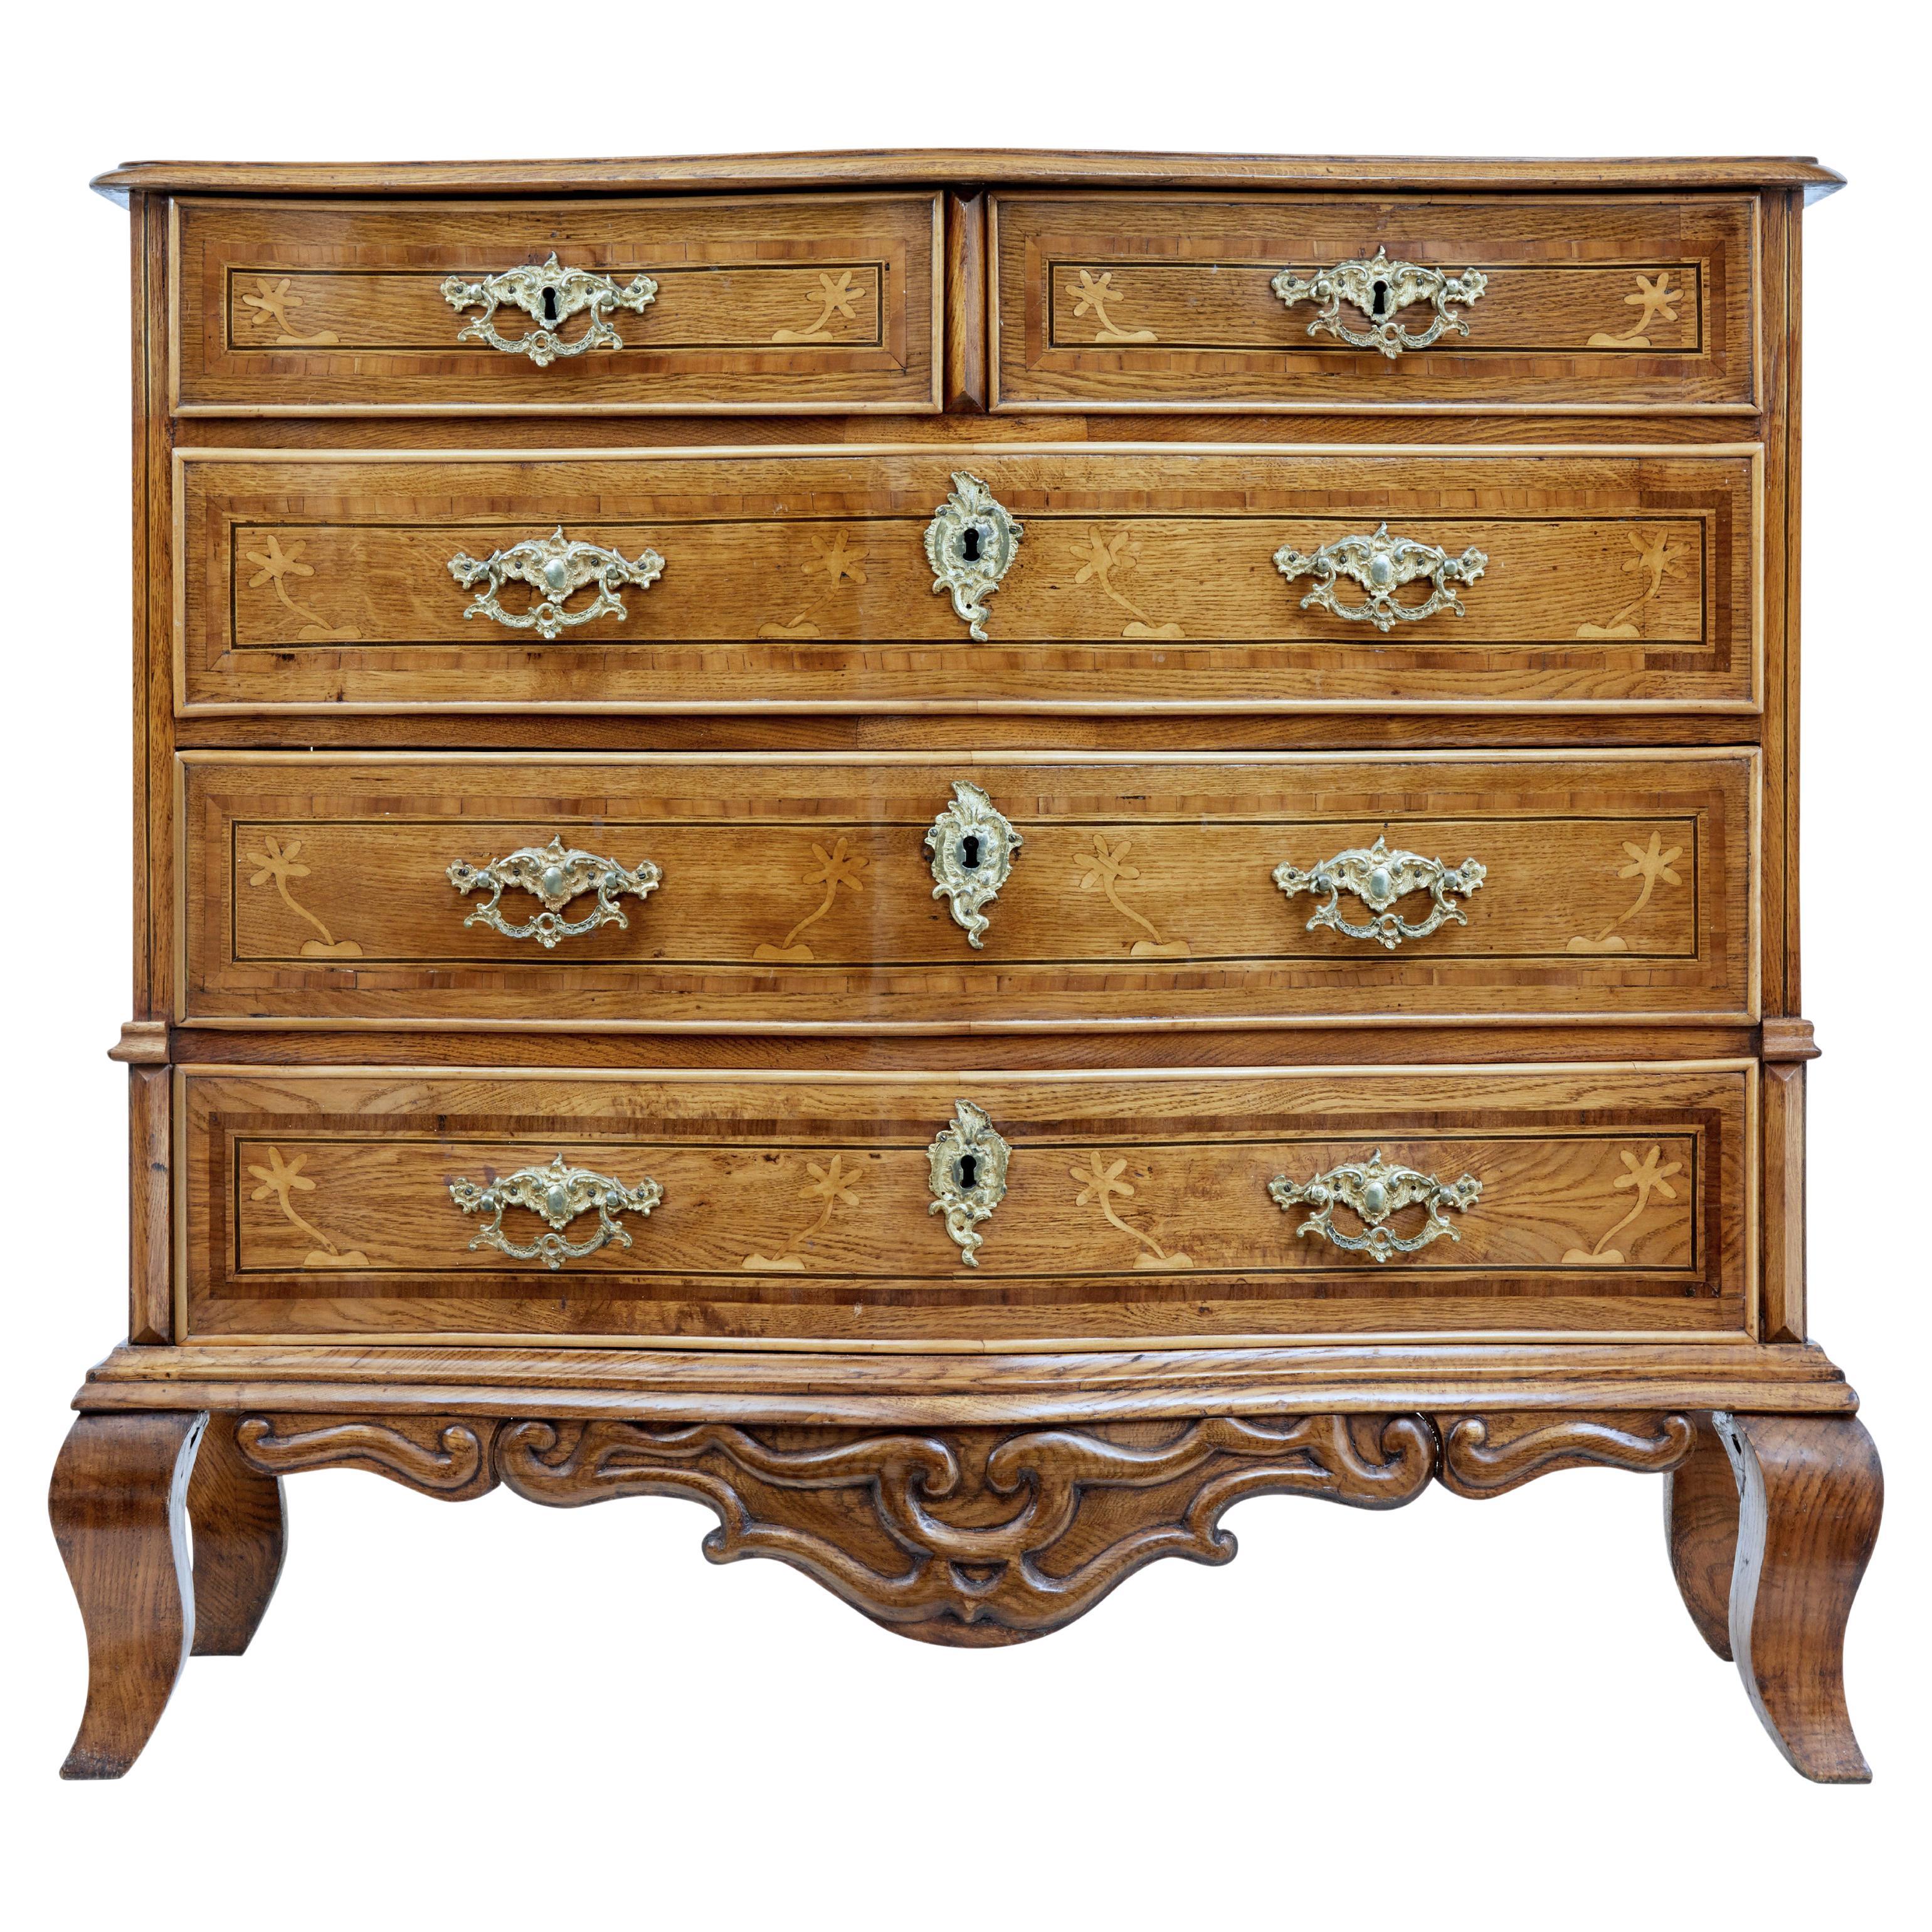 Early 19th century Swedish oak inlaid chest of drawers